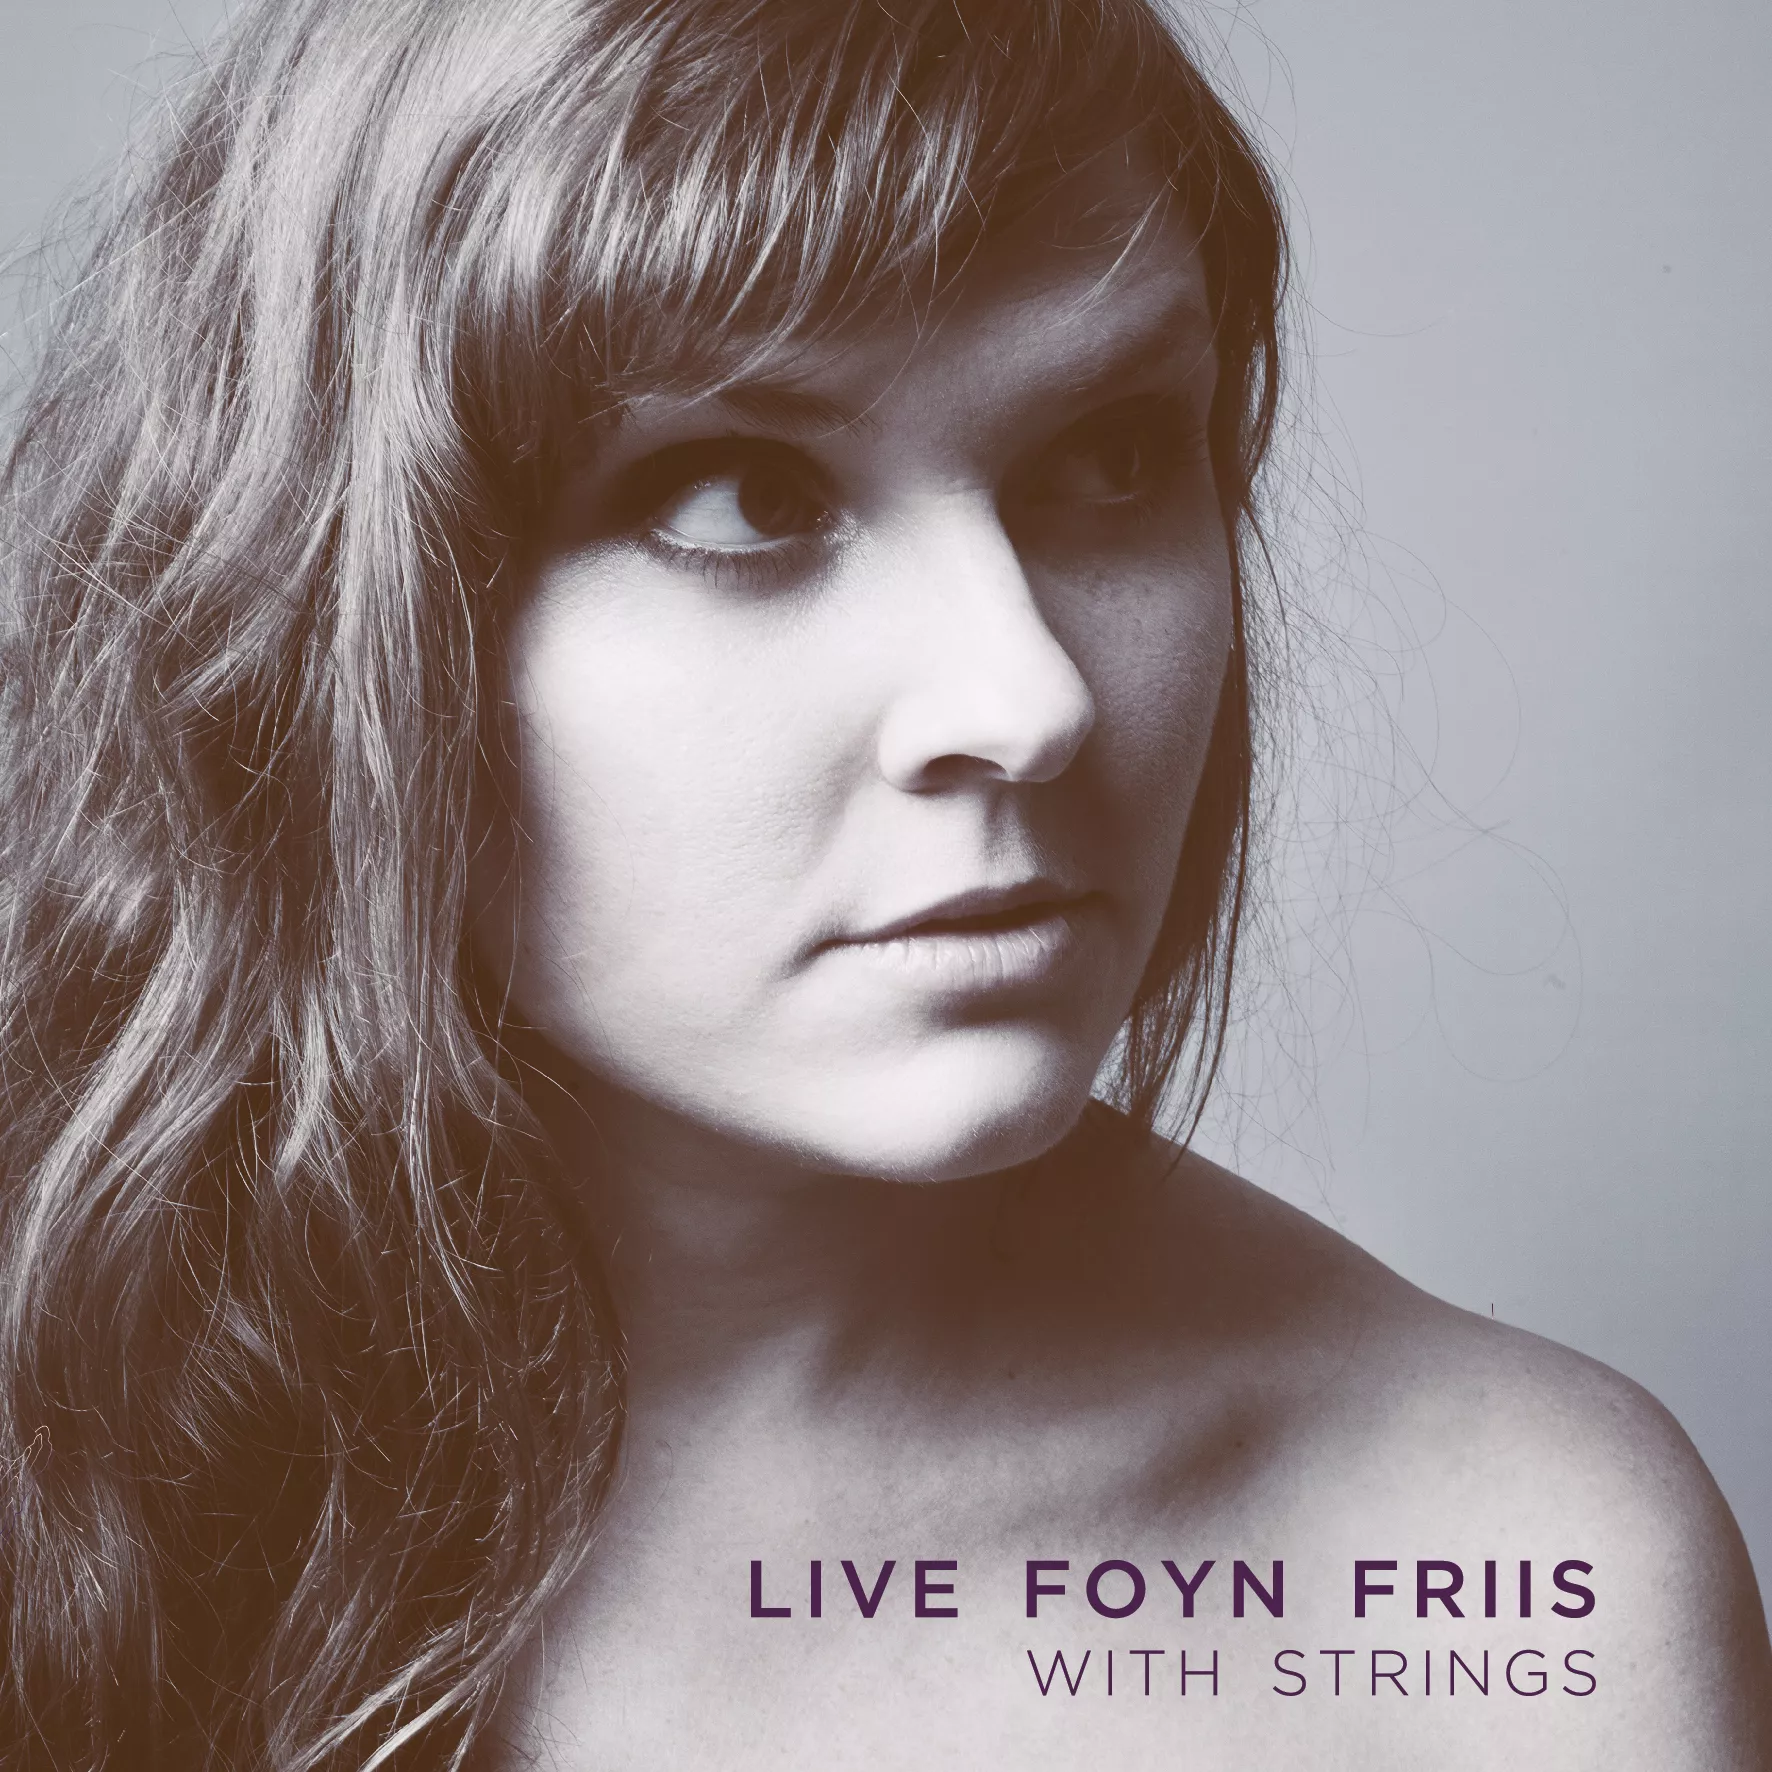 With Strings - Live Foyn Friis